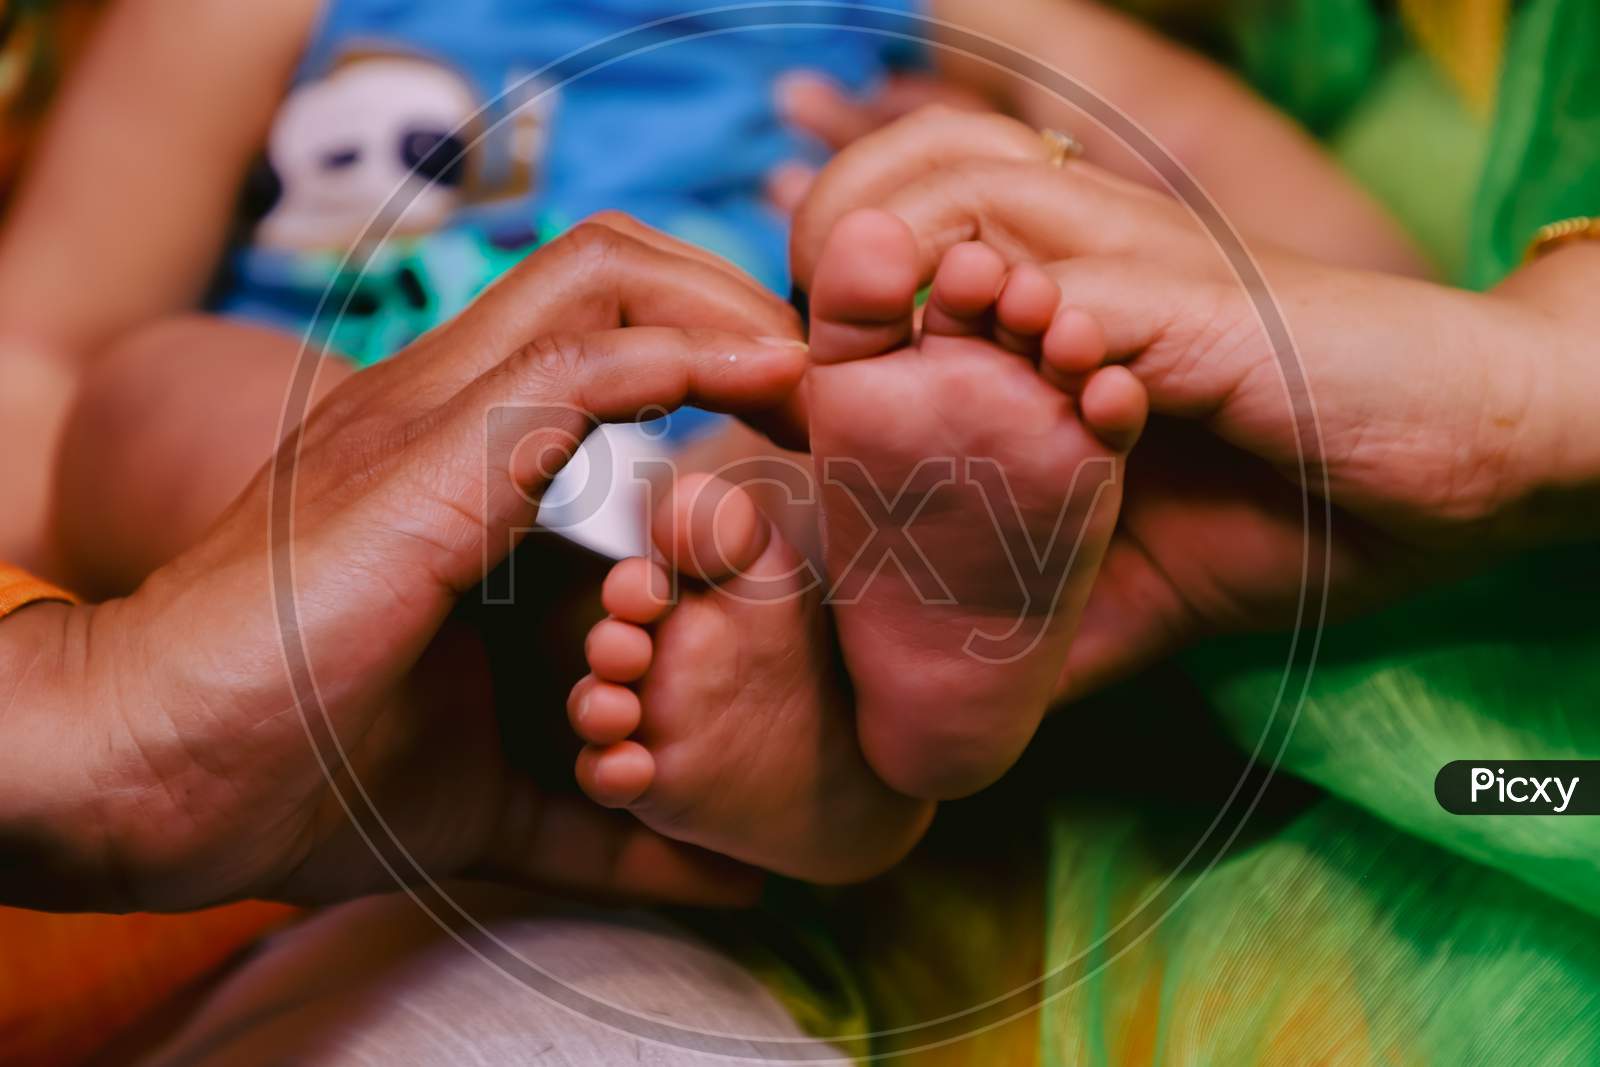 Indian family holding their child feet in their hand